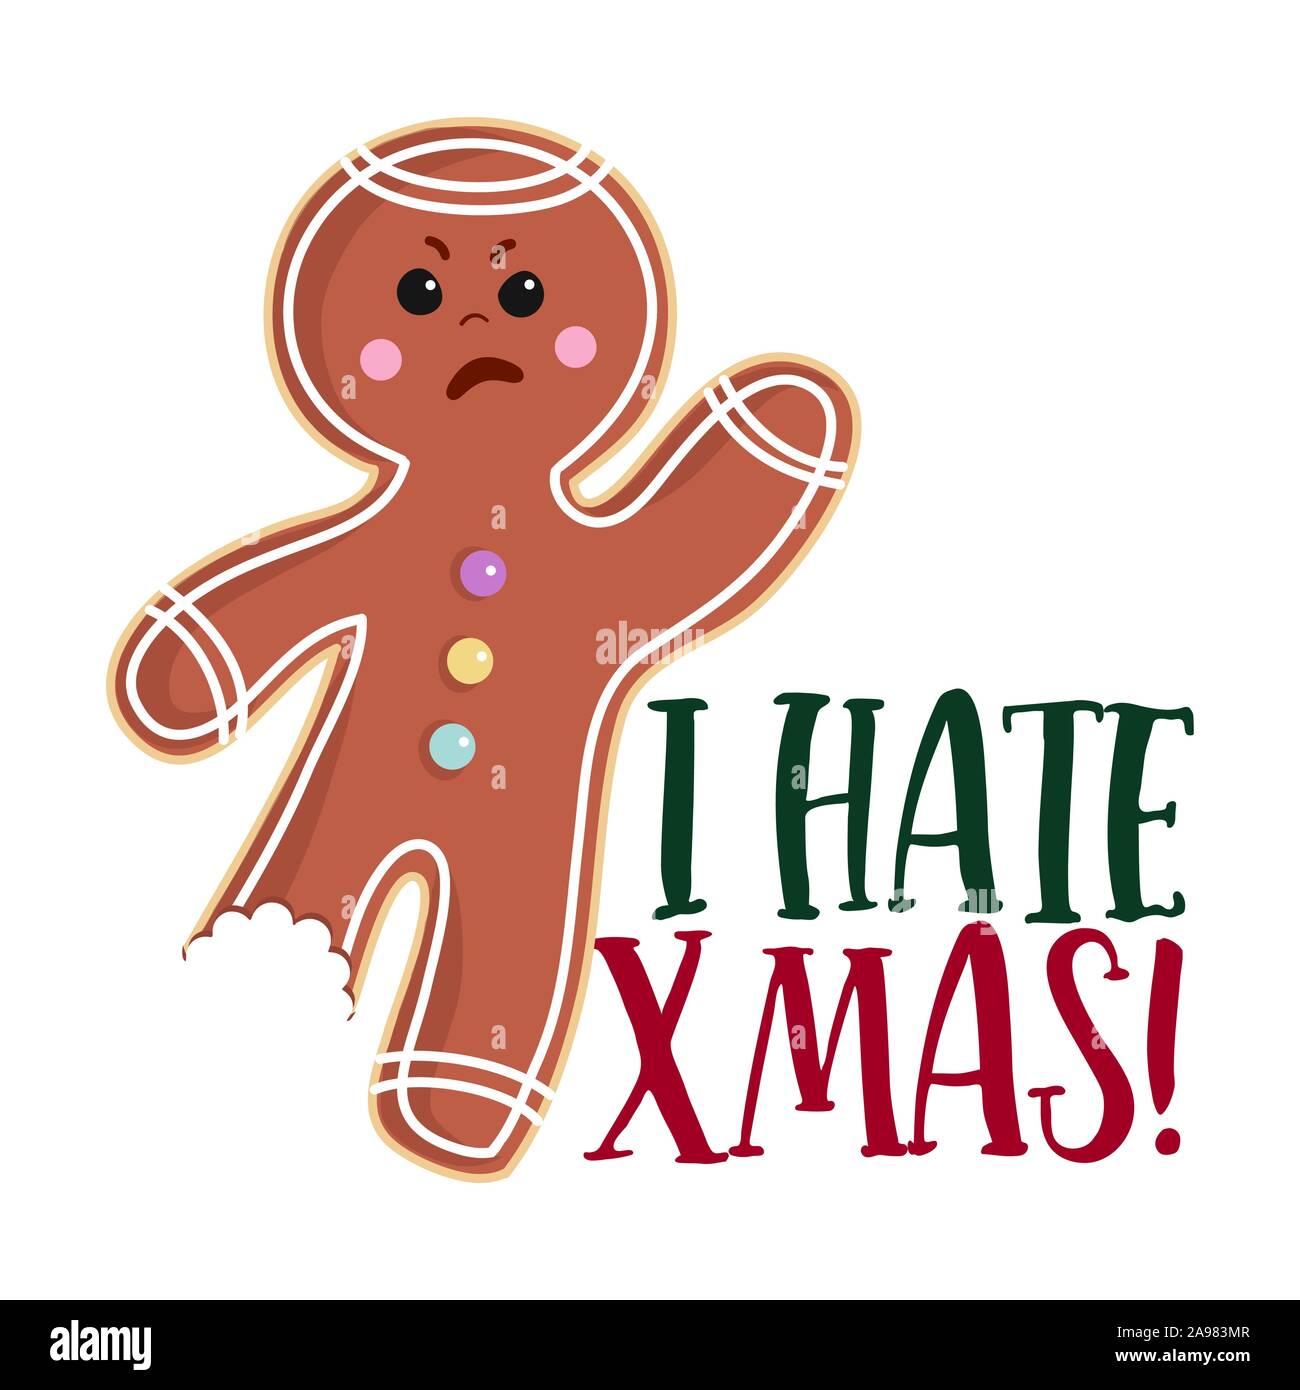 I hate Christmas - Hand drawn vector illustration. Cookie color poster. Good for scrap booking, posters, greeting cards, banners, textiles, gifts, shi Stock Vector